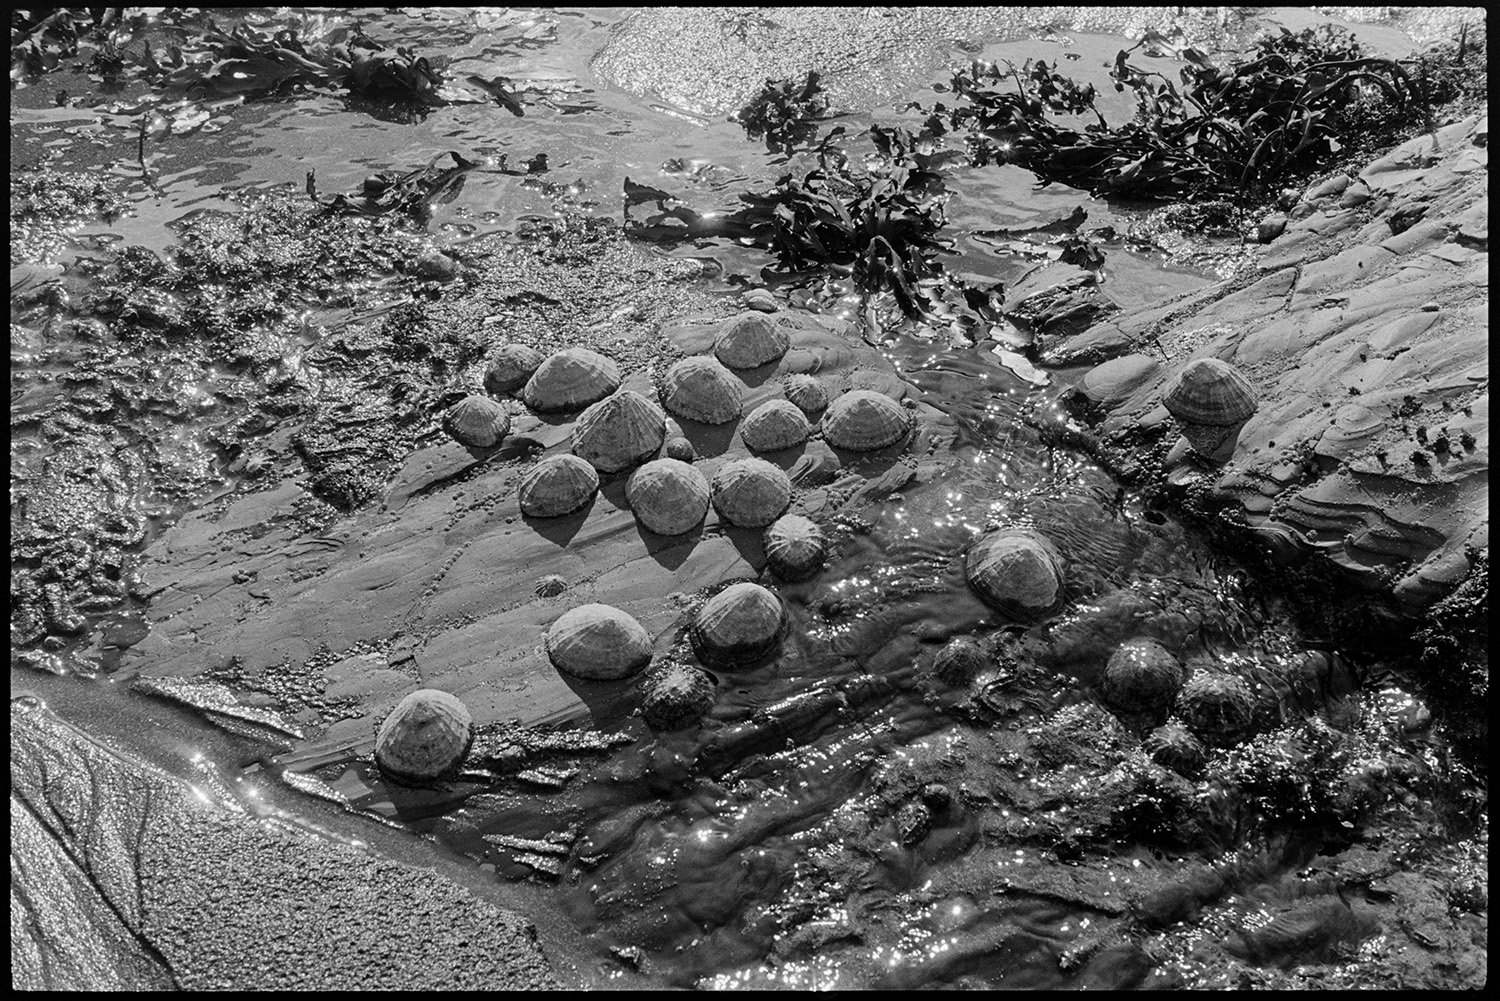 Seaside, beach with shells on rocks, limpets. 
[Limpets and seaweed on a rock on the seashore or beach at Bucks Mills.]